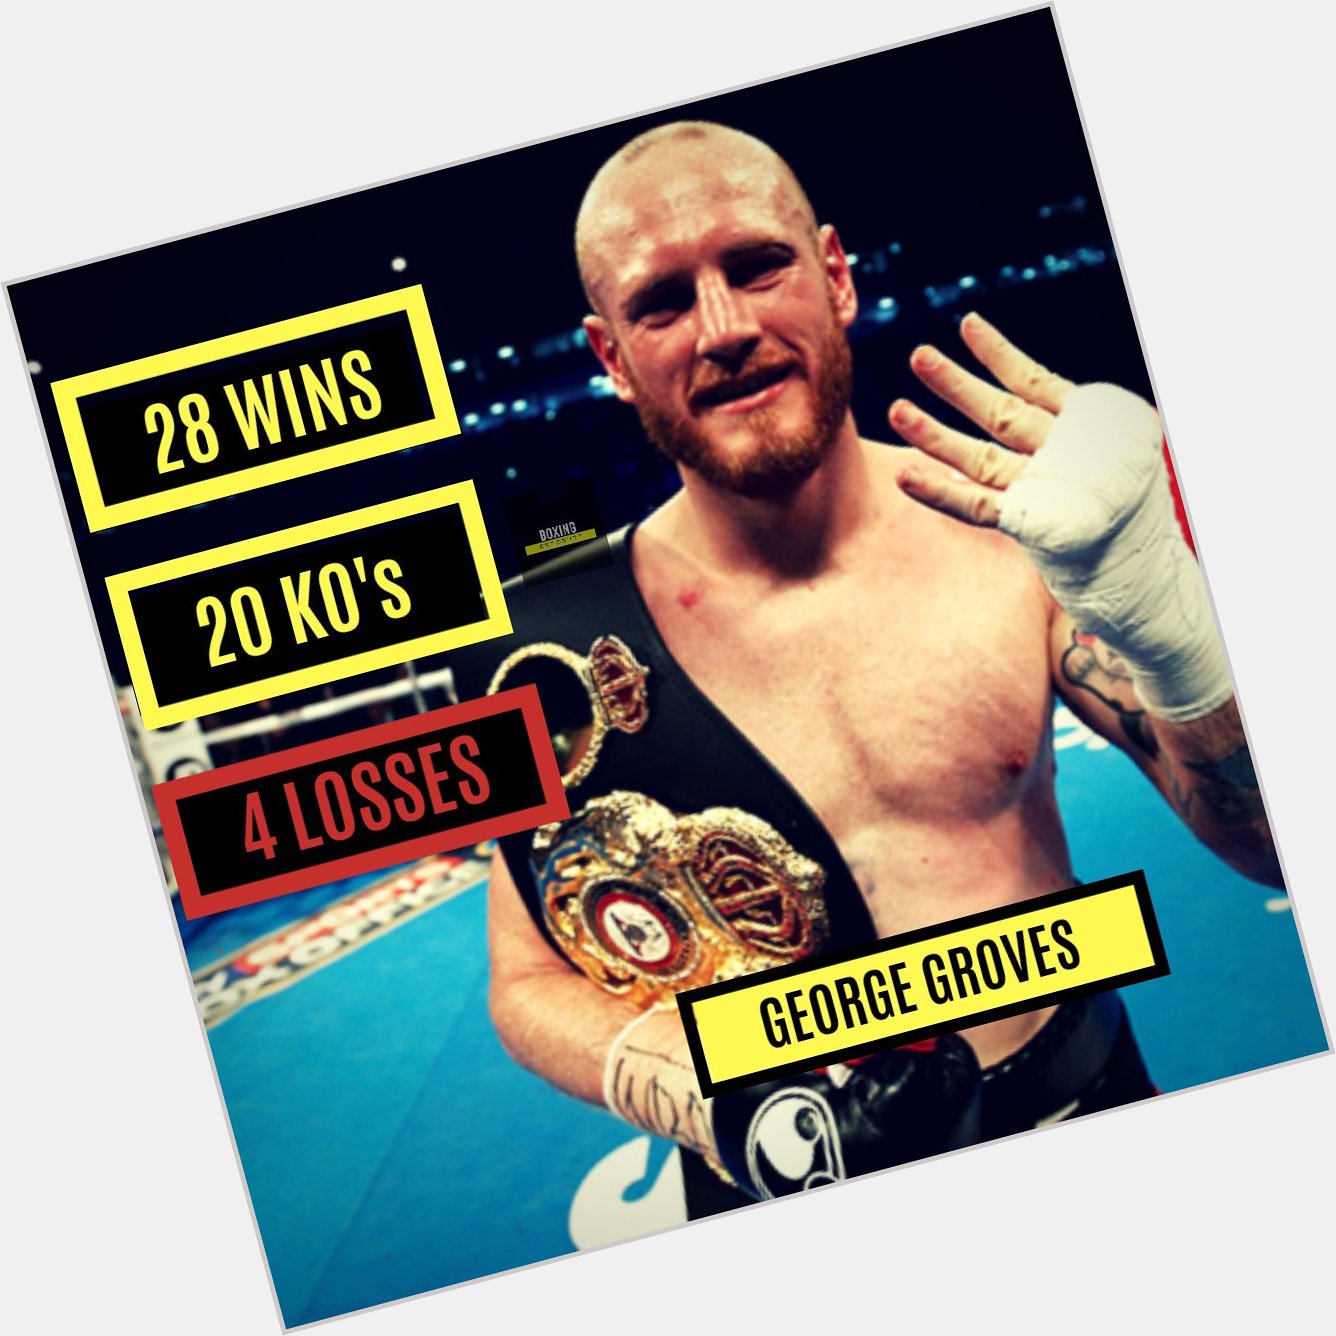 Happy 31st birthday to George Groves  Froch  Froch  Jack  Chudinov Mission accomplished. 